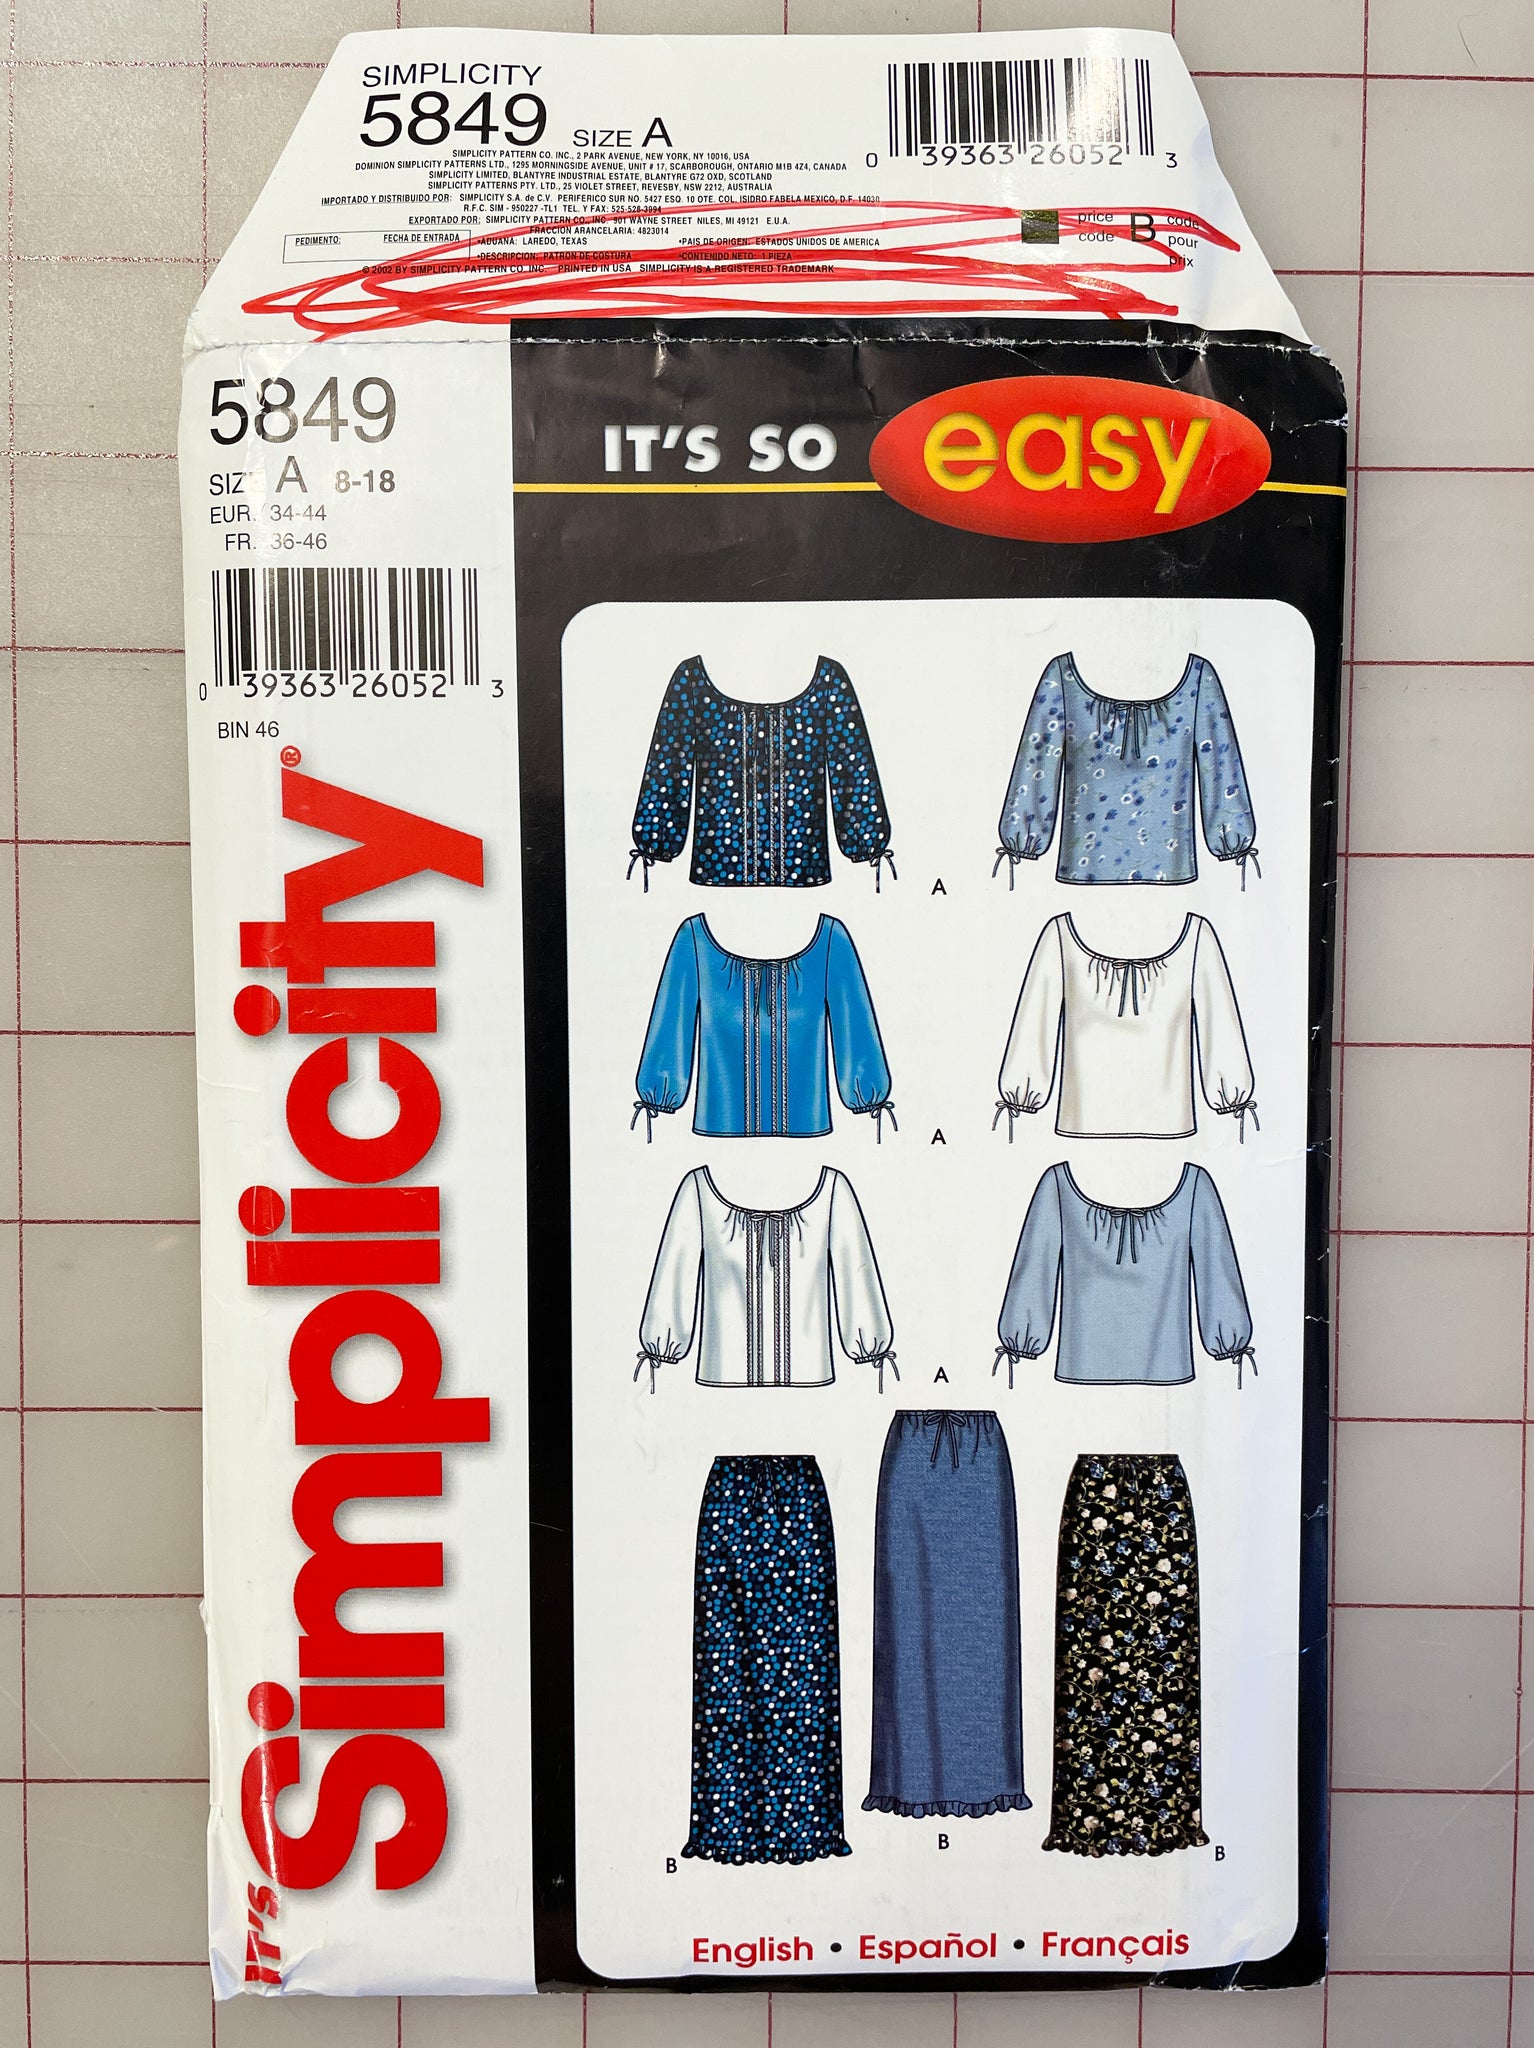 SALE 2002 Simplicity 5849 Pattern - Blouses and Skirt FACTORY FOLDED